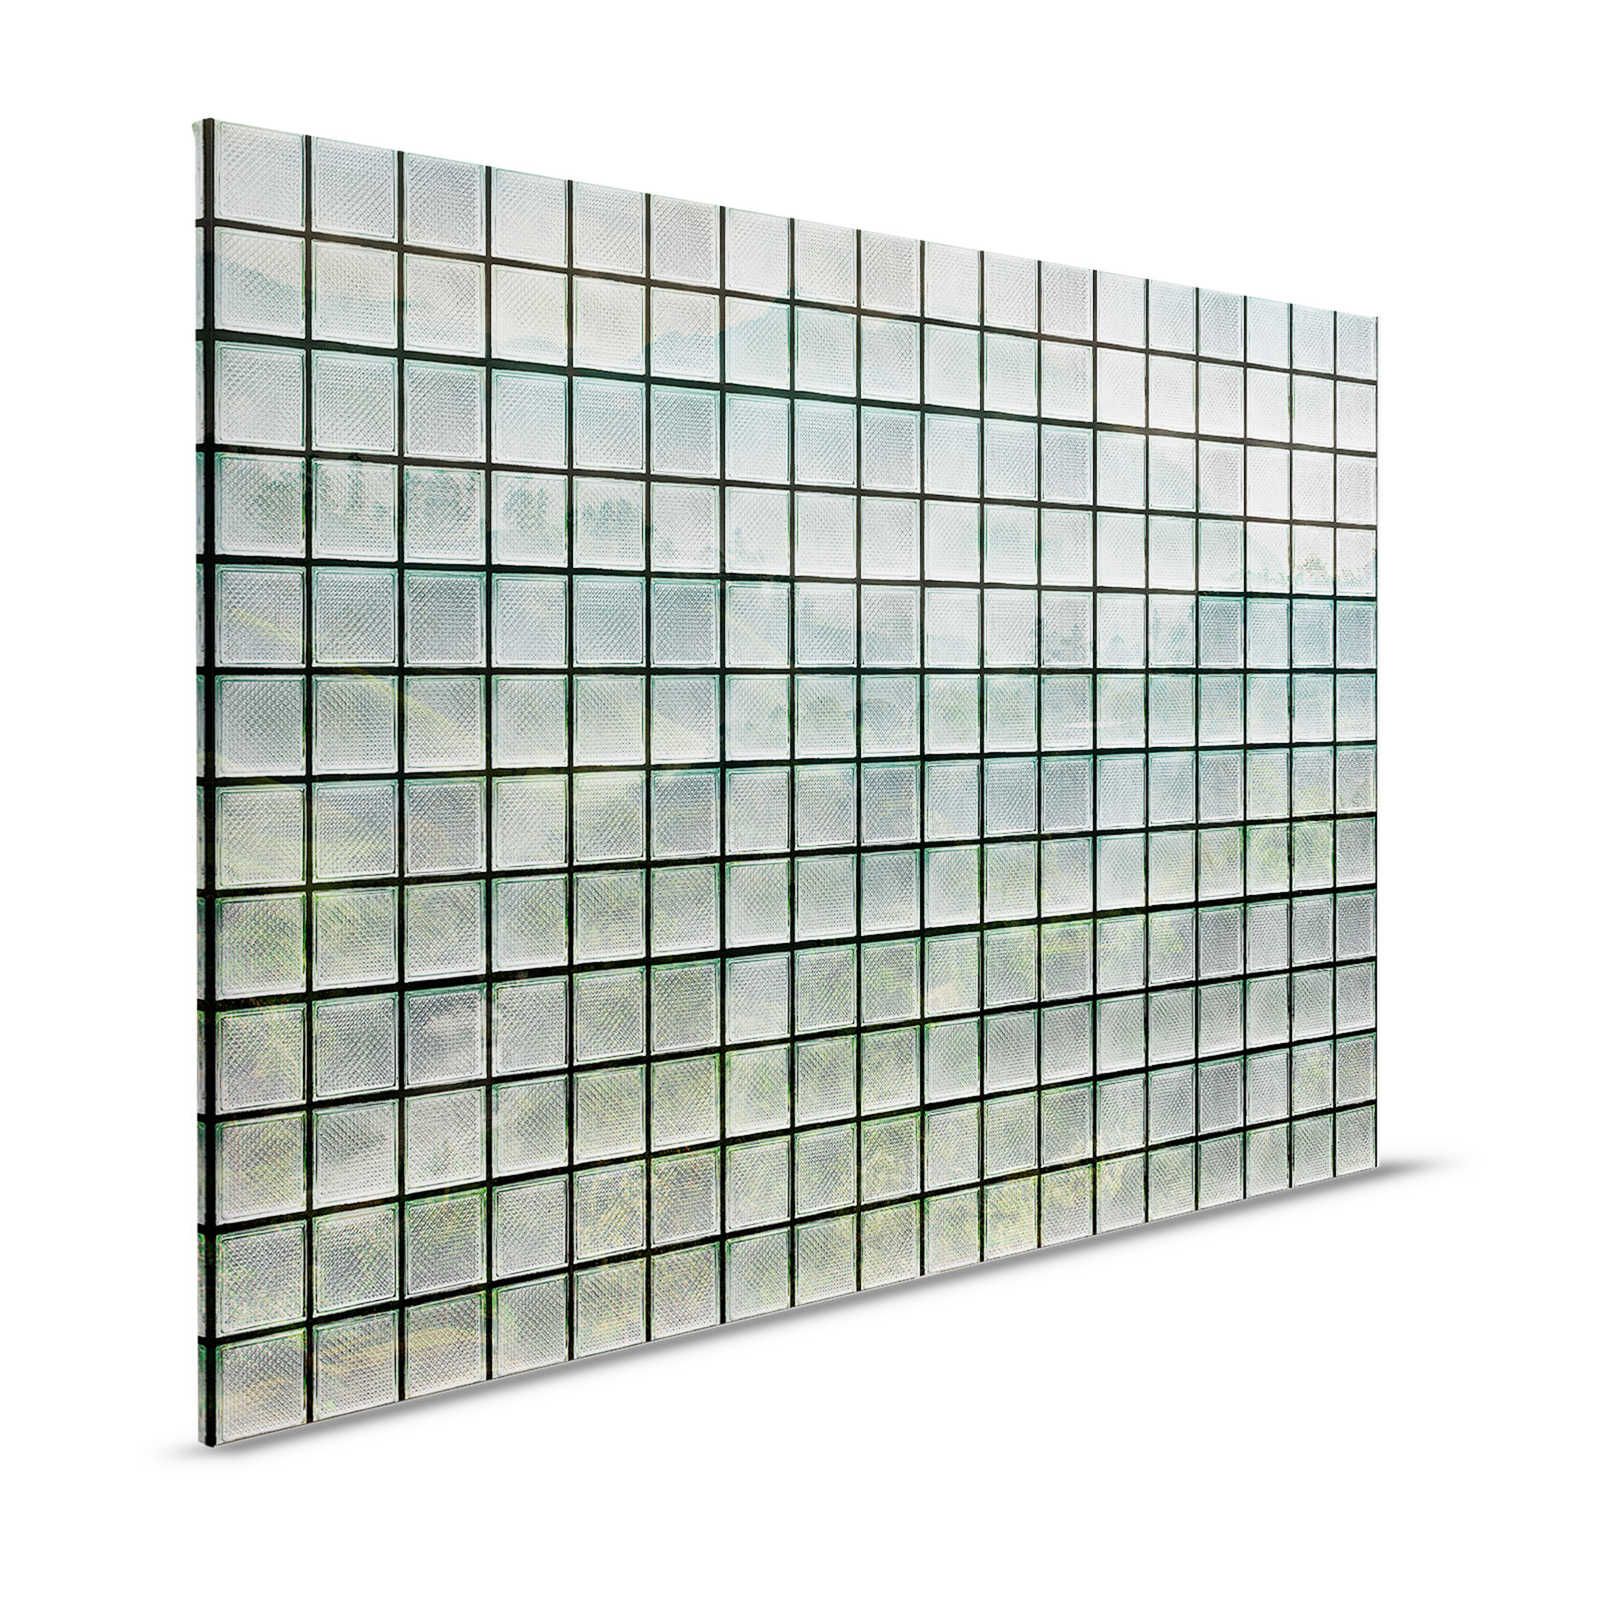 Green House 3 - Window Canvas Painting Glass Blocks & Tropical Forest - 1.20 m x 0.80 m
